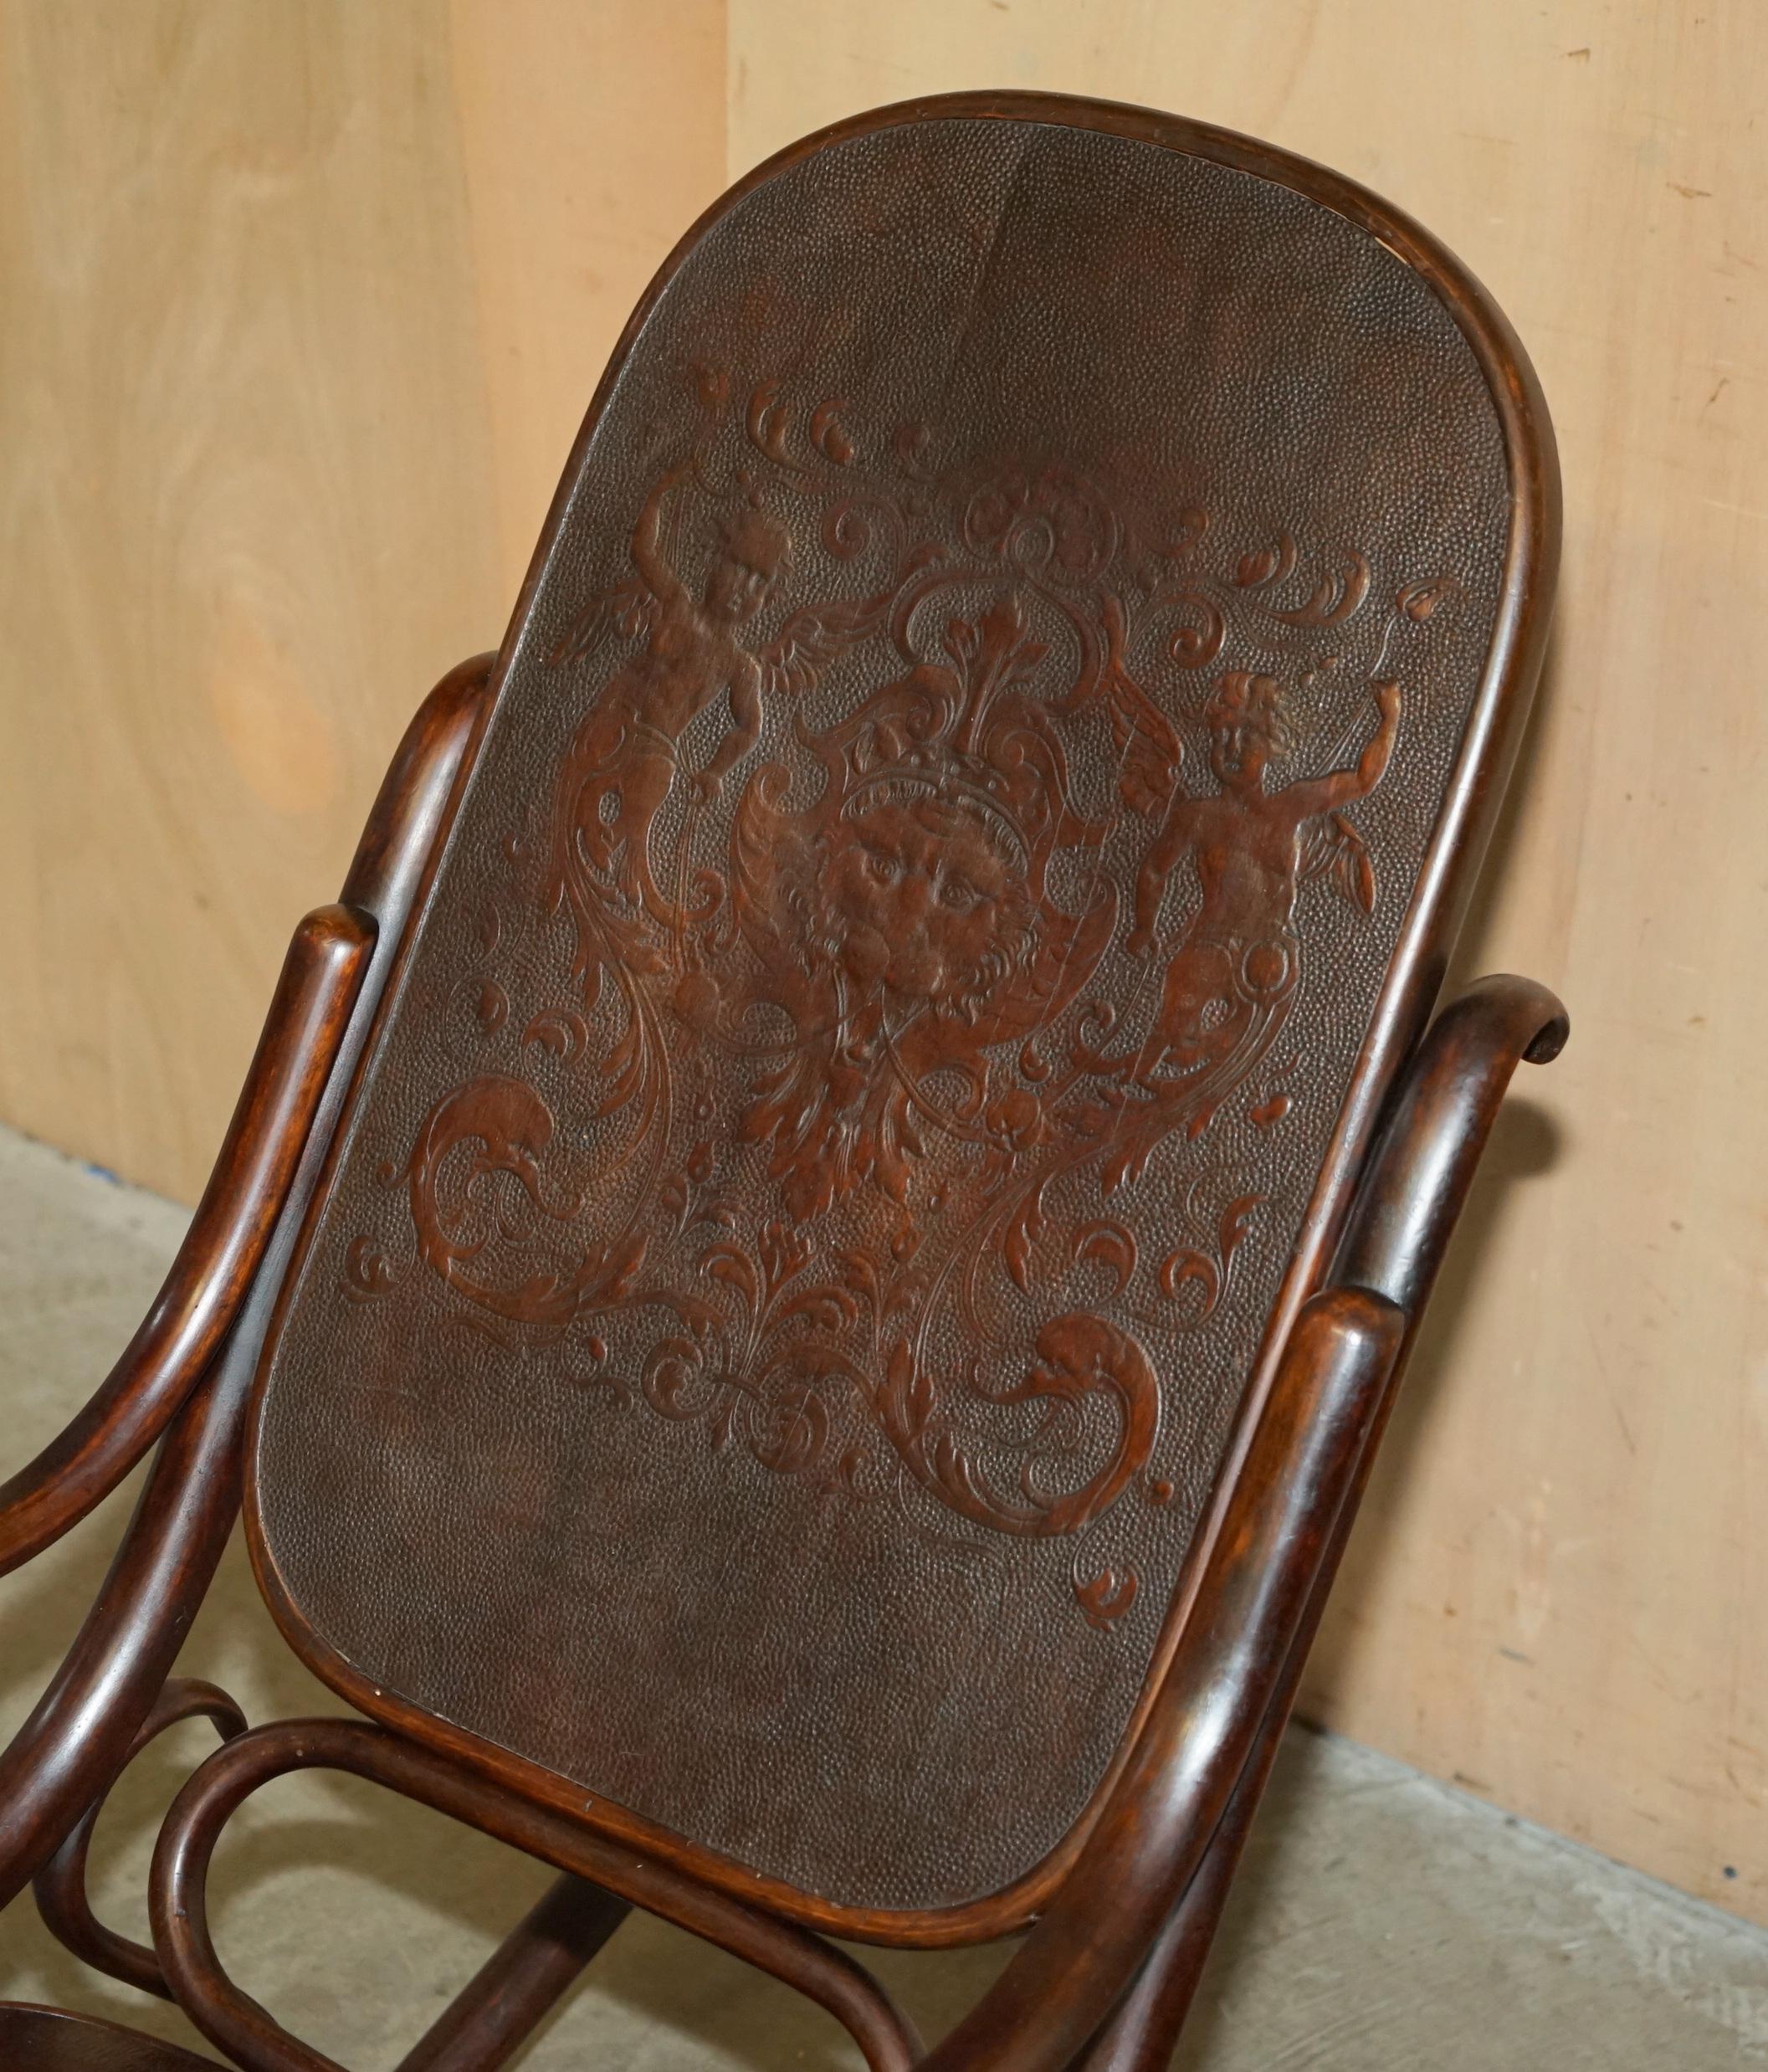 English EXQUISITE ViCTORIAN THONET ROCKING CHAIR WITH CHERUB CARVED BACK & SEAT PANELS For Sale